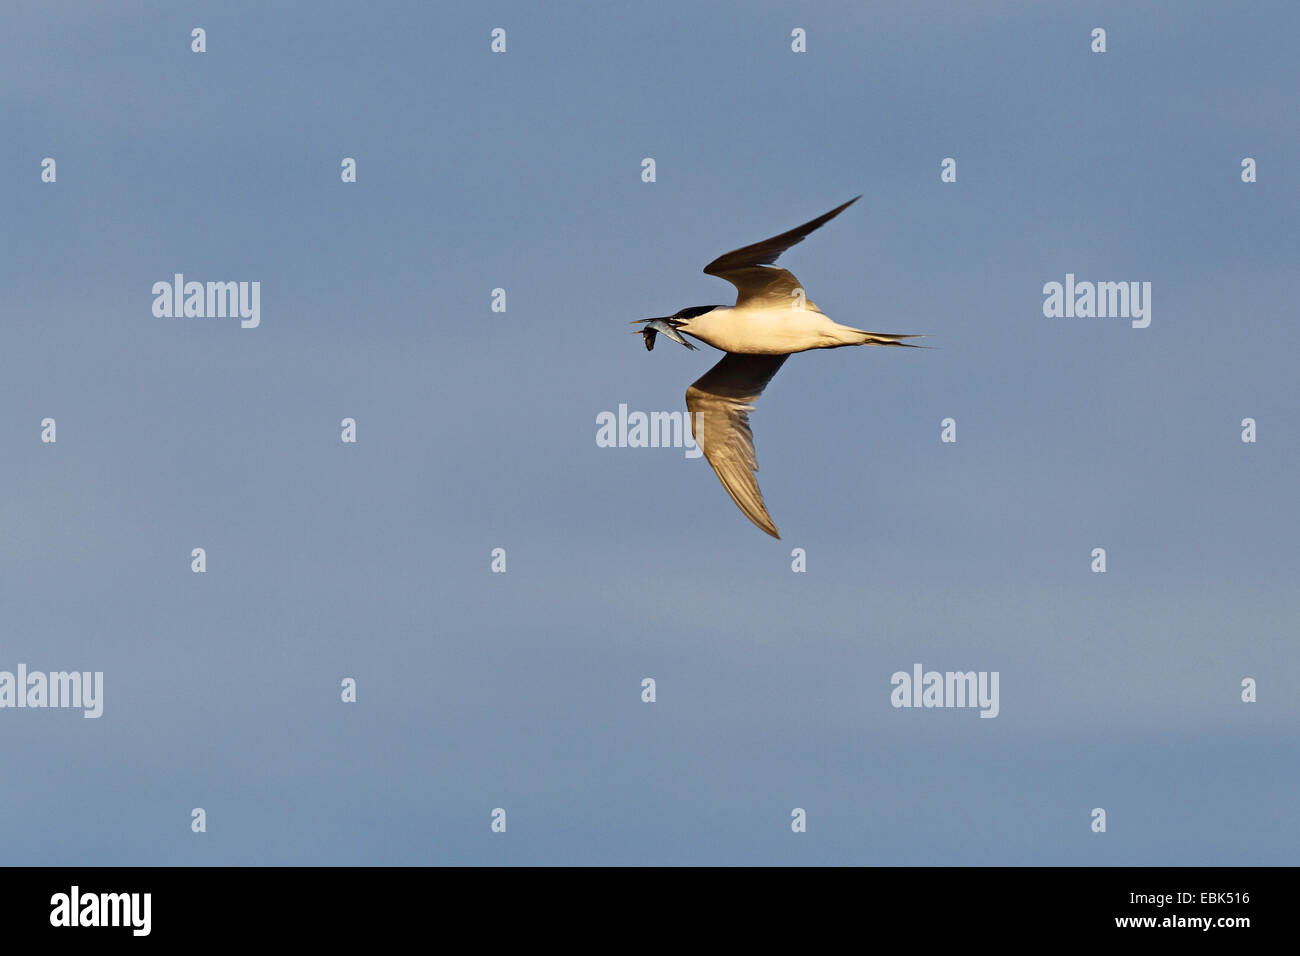 sandwich tern (Sterna sandvicensis, Thalasseus sandvicensis), flying with a caught fish in the beak, Netherlands, Texel Stock Photo